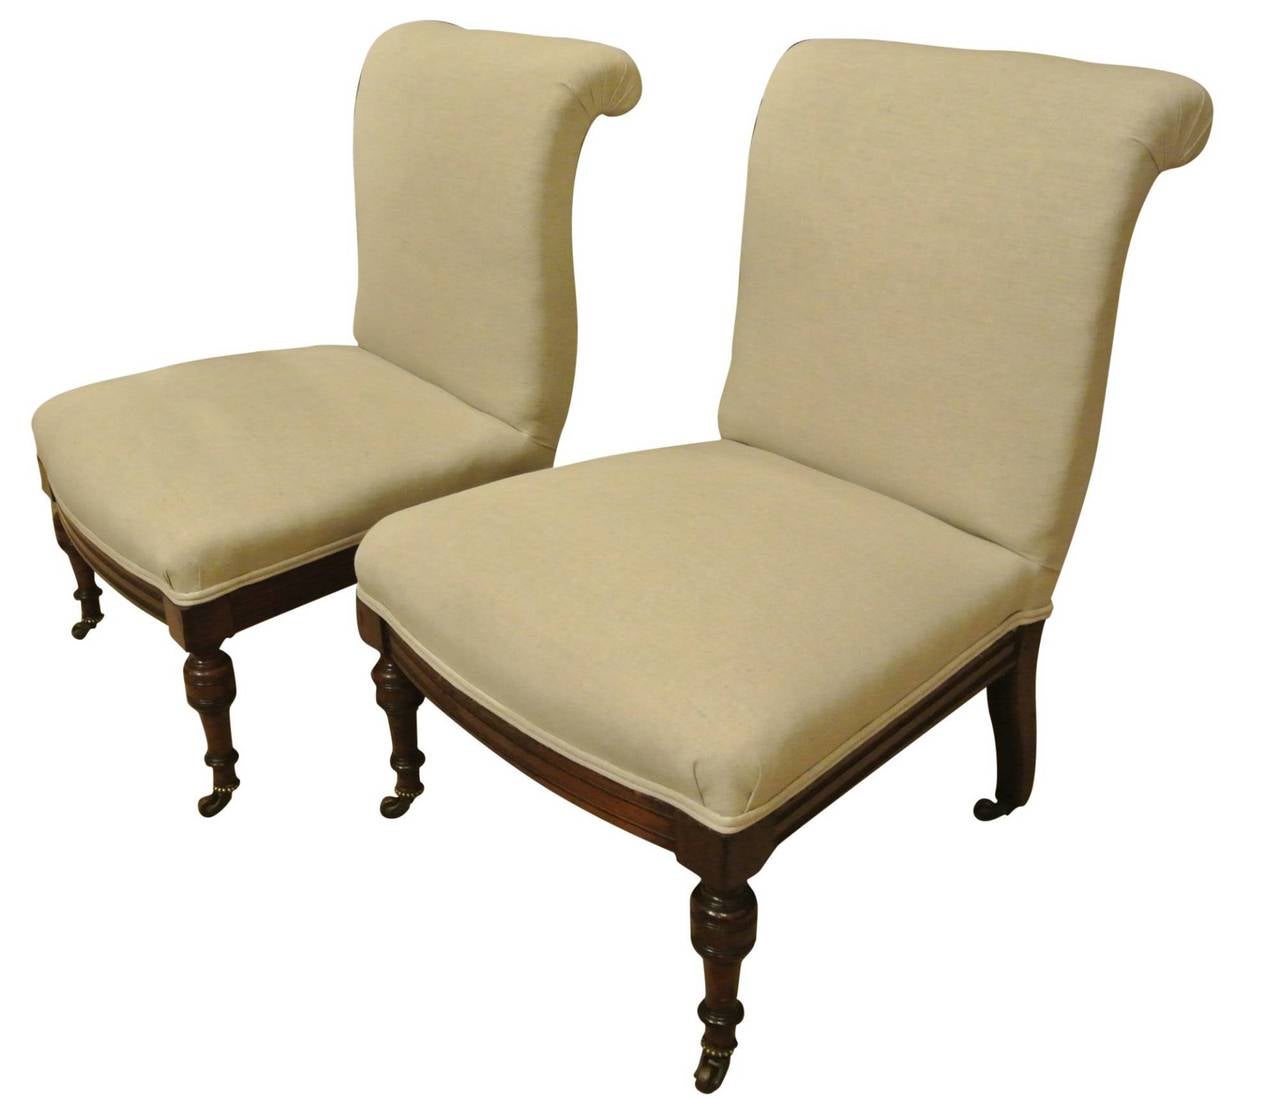 Late Victorian Pair of 19th Century Mahogany Bedroom Chairs